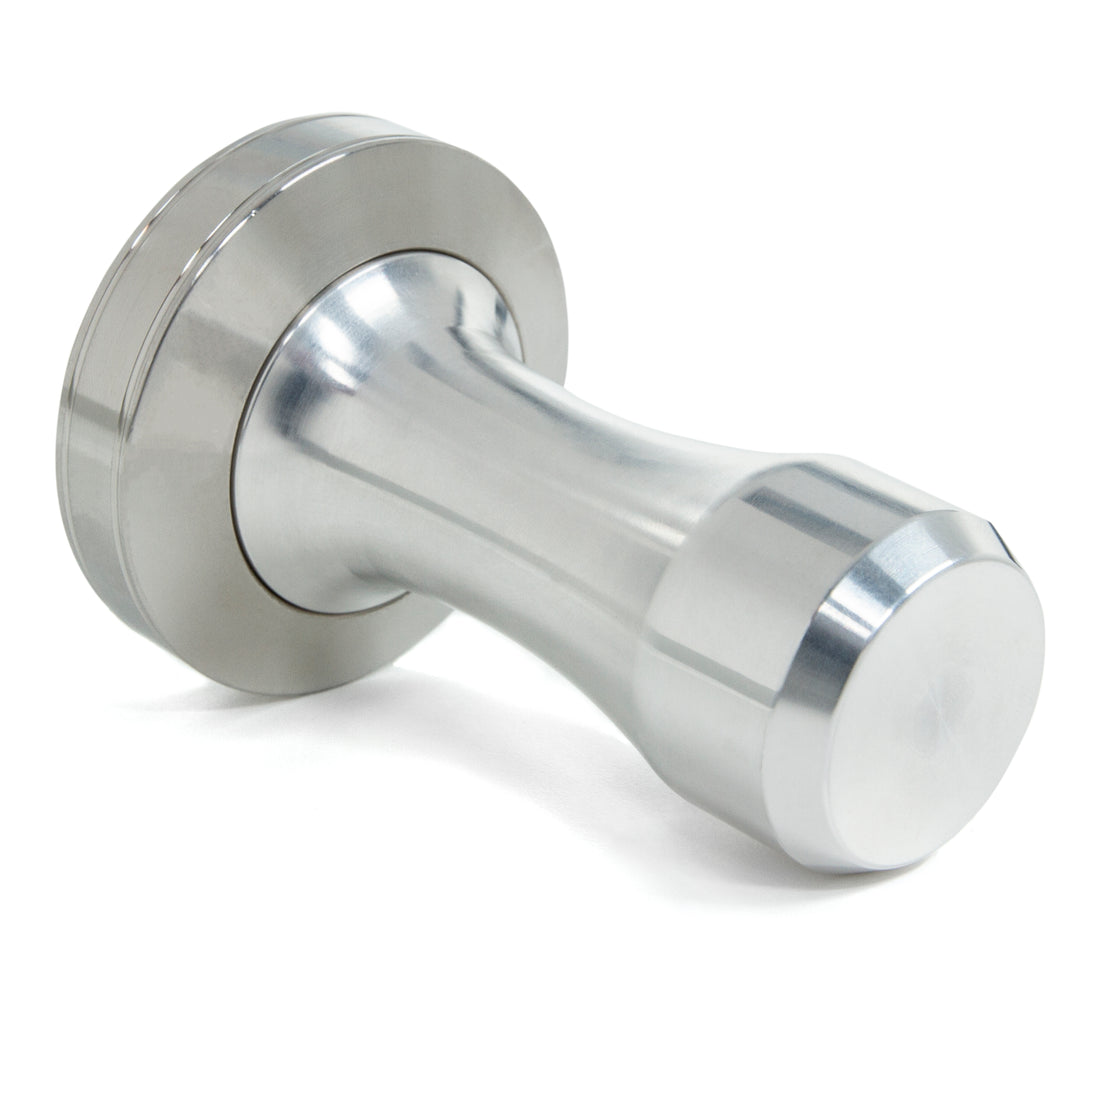 Espresso coffee Tamper 51mm , Stainless Steel price in Egypt,  Egypt